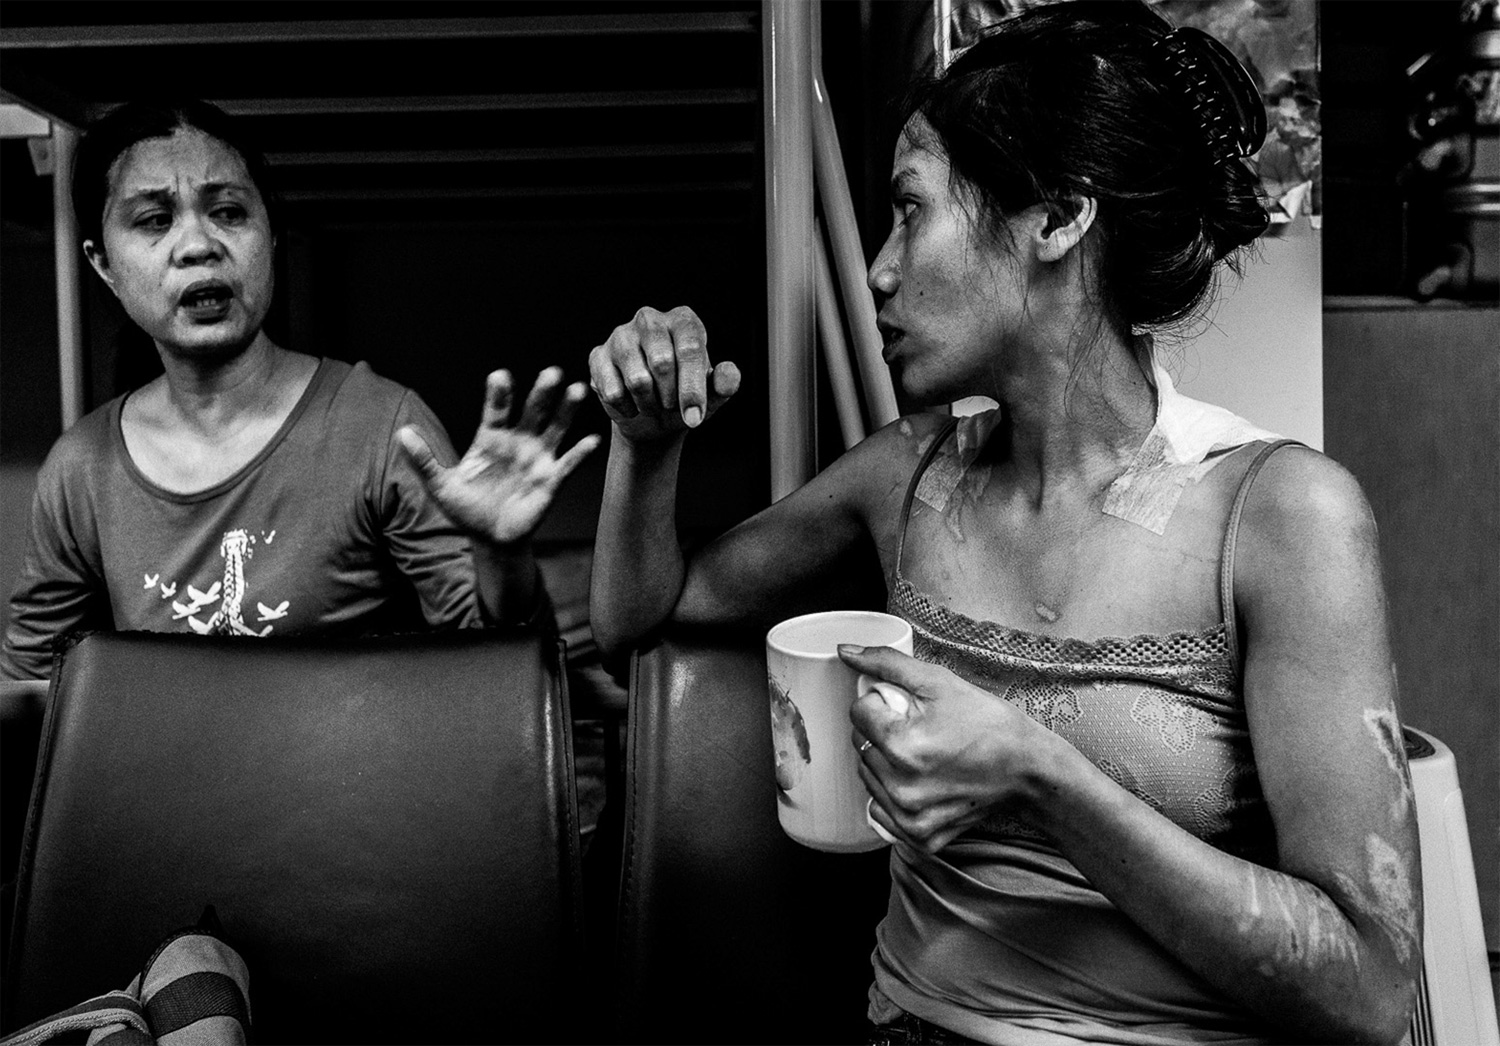 Shirley Dalisay and Marisa, residents of Bethune House, catch up on their daily activities. Both women came to Hong Kong from the Philippines. Here, residents support each other emotionally, socially, and sometimes even financially, when they can. According to Antonio, most of Hong Kong’s approximately 330,000 foreign domestic workers come from the Philippines and Indonesia, half are married, and most are on-call 24 hours a day.